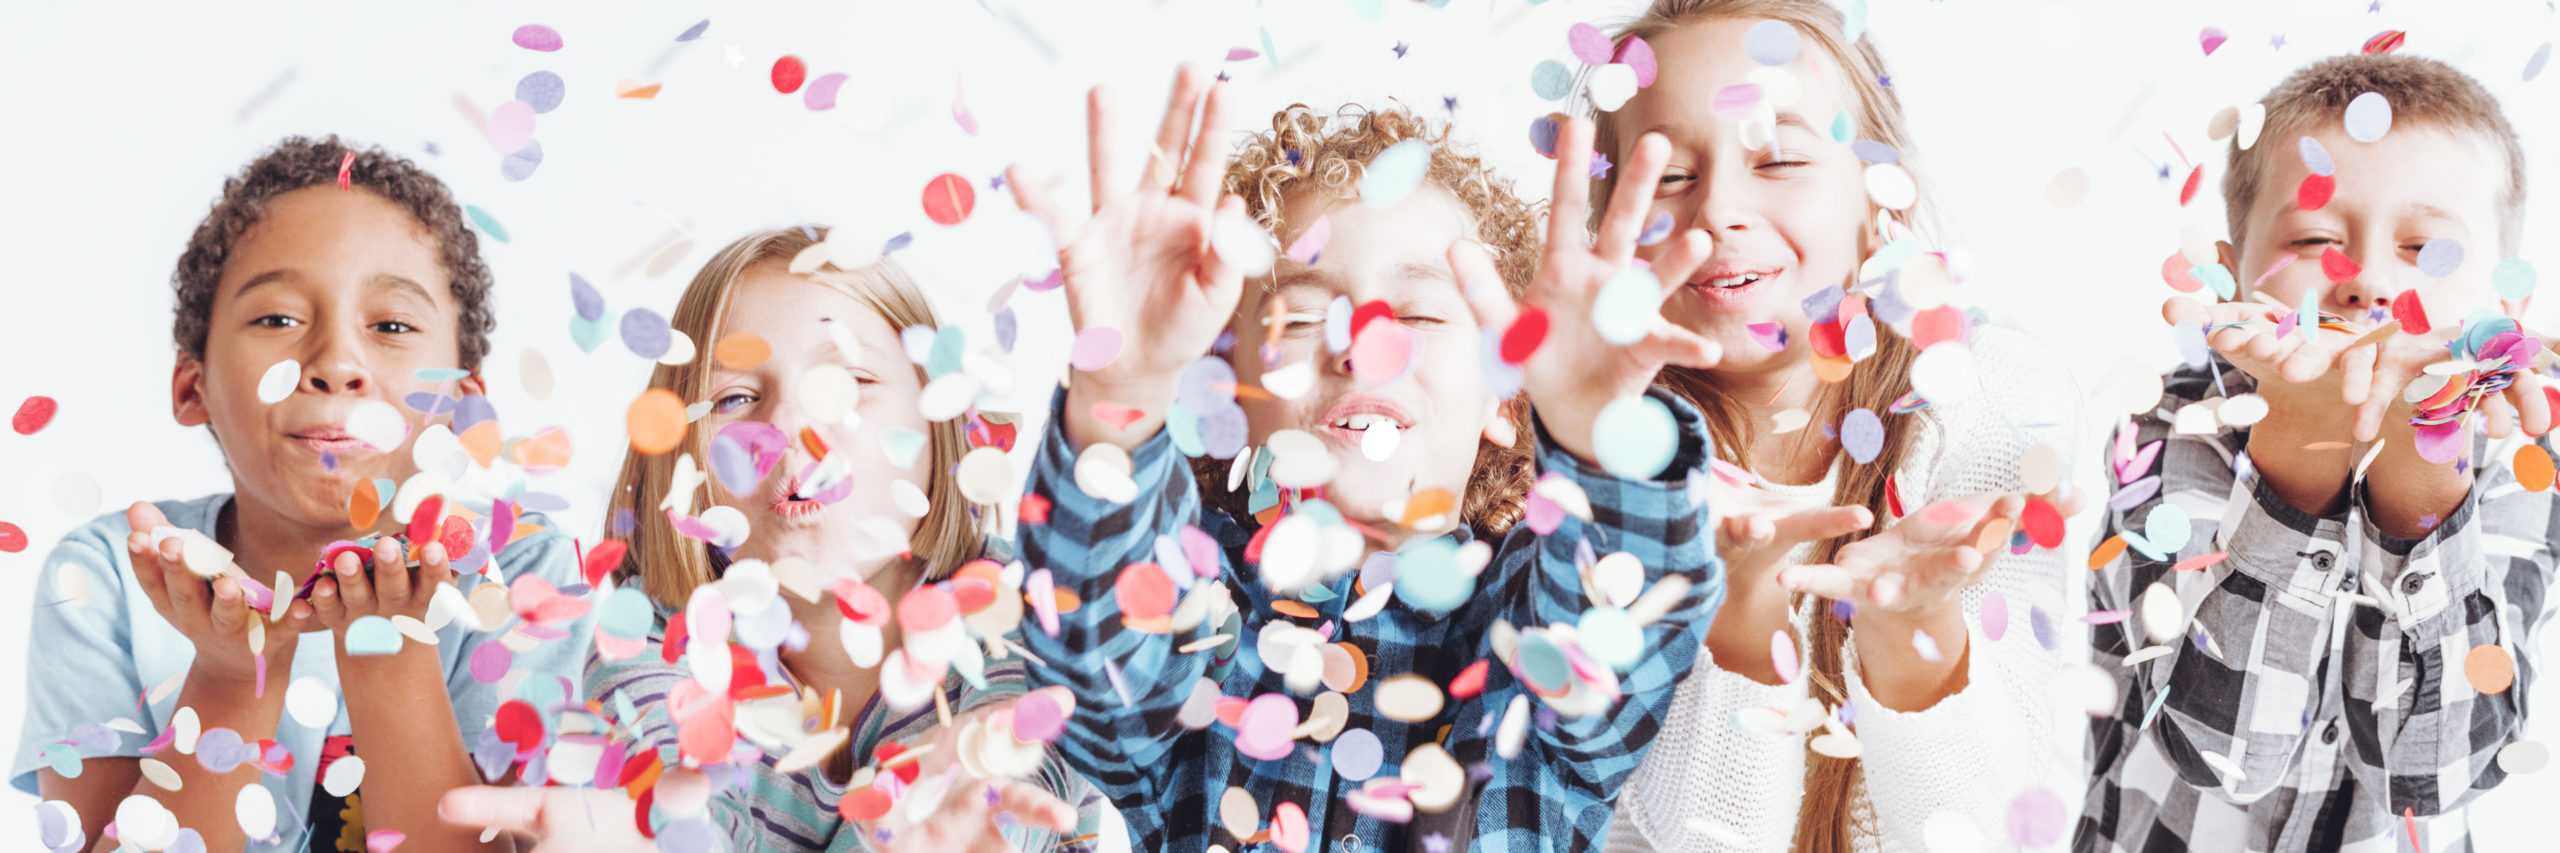 Group,Of,Smiling,Children,In,Casual,Clothes,Throwing,Confetti,Around